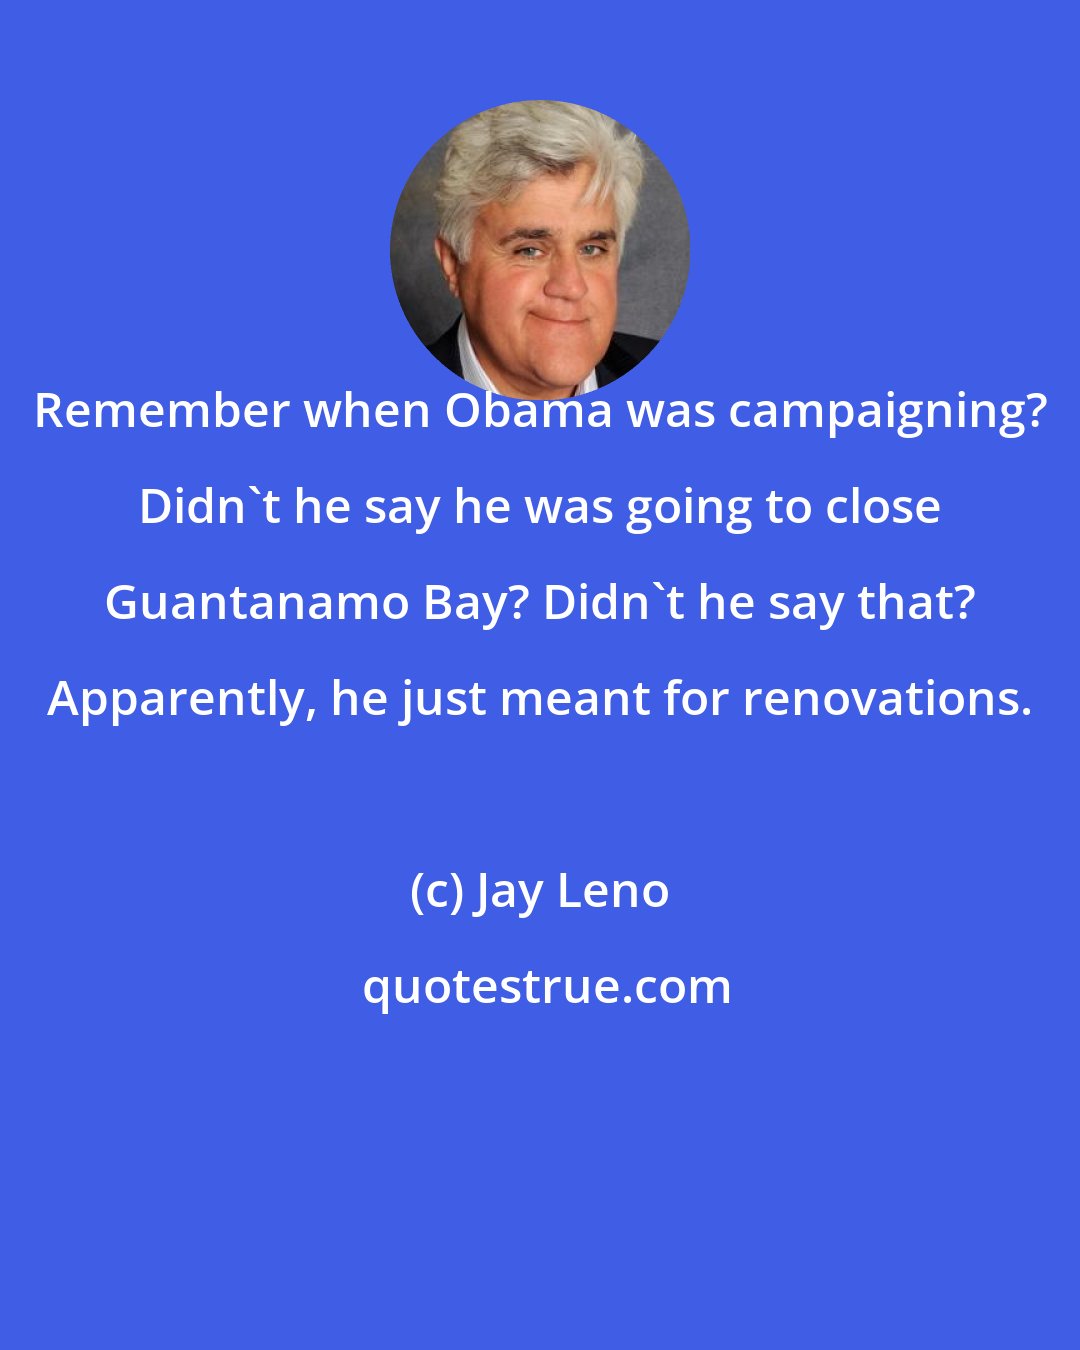 Jay Leno: Remember when Obama was campaigning? Didn't he say he was going to close Guantanamo Bay? Didn't he say that? Apparently, he just meant for renovations.